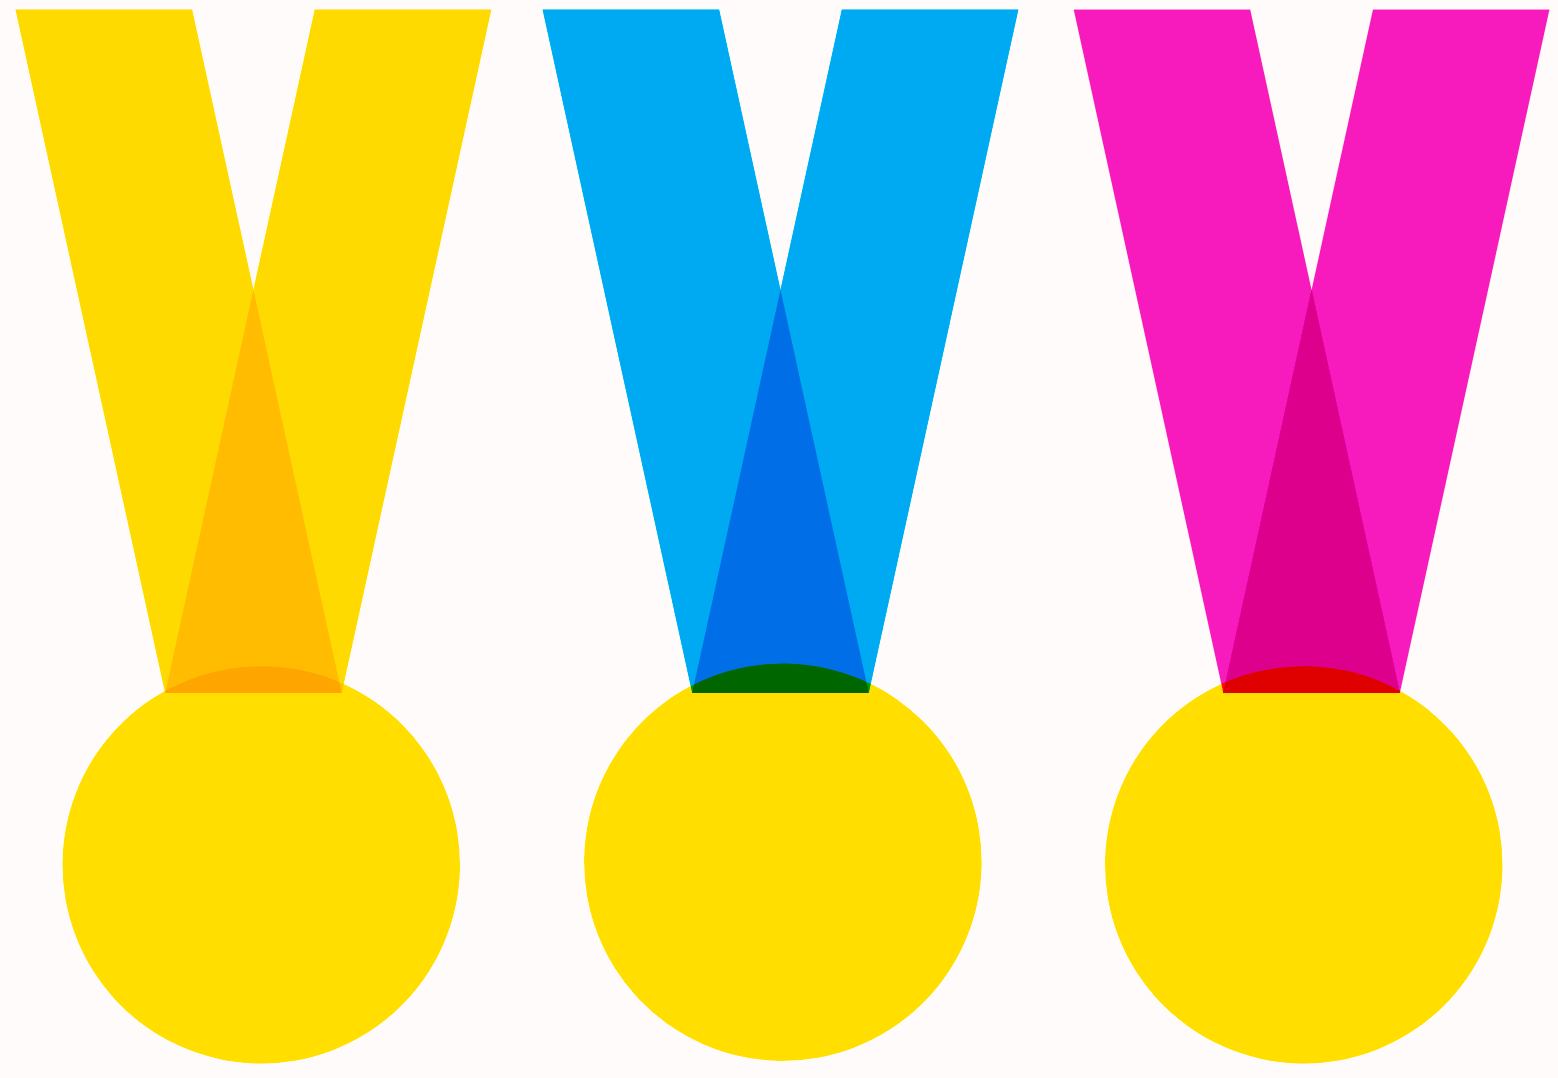 3 awards medals in basic geometric shapes, with a different colour ribbon, yellow, blue and pink